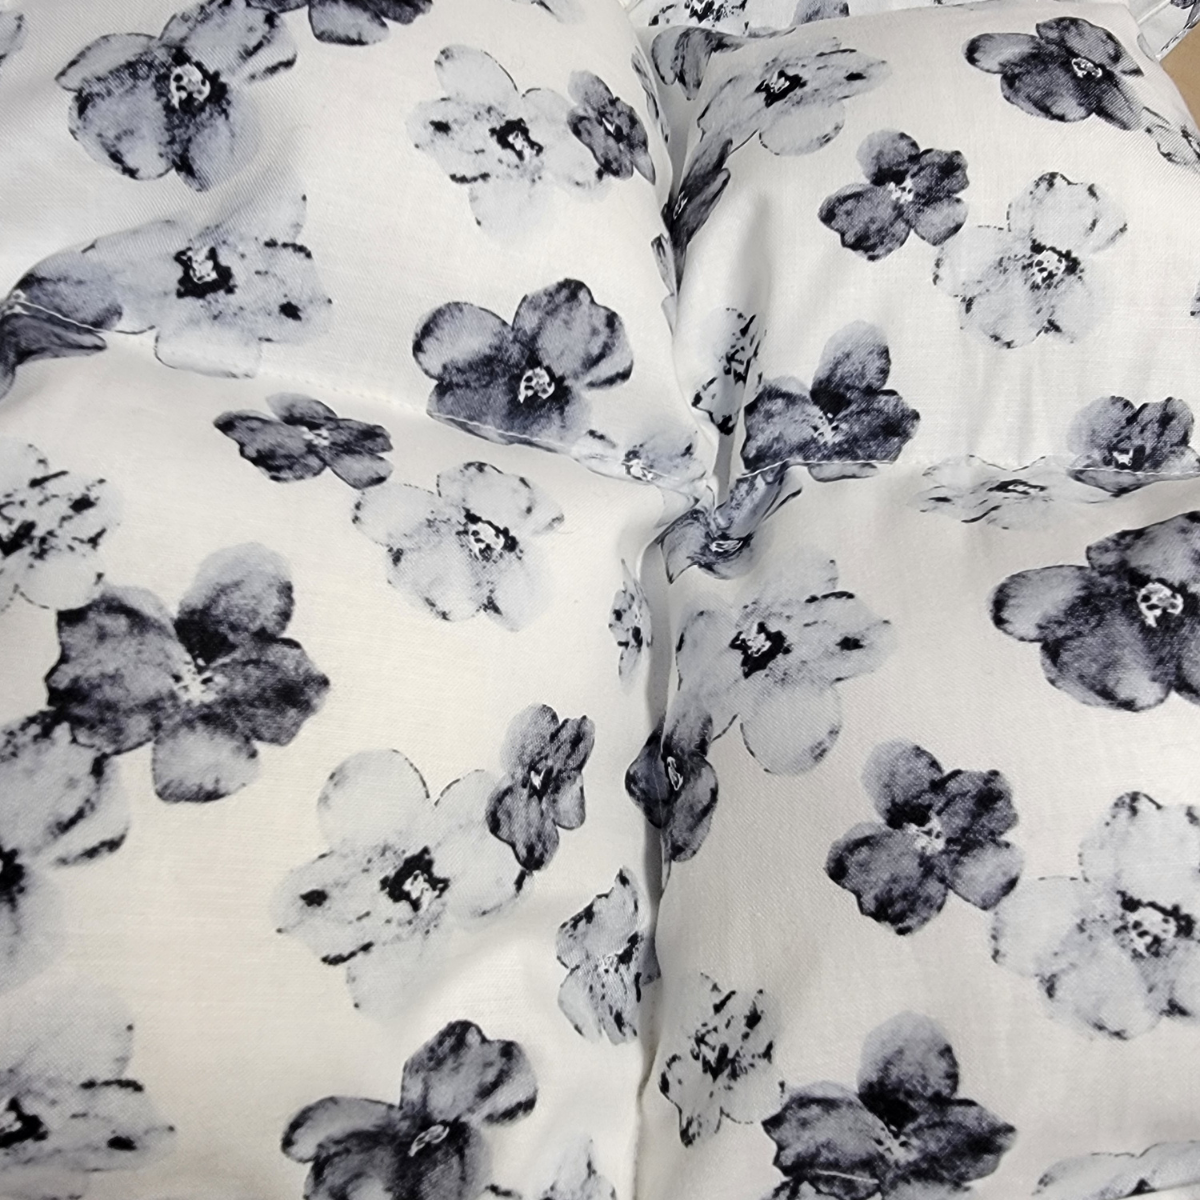 Weighted Blanket - Black and Gray Flowers